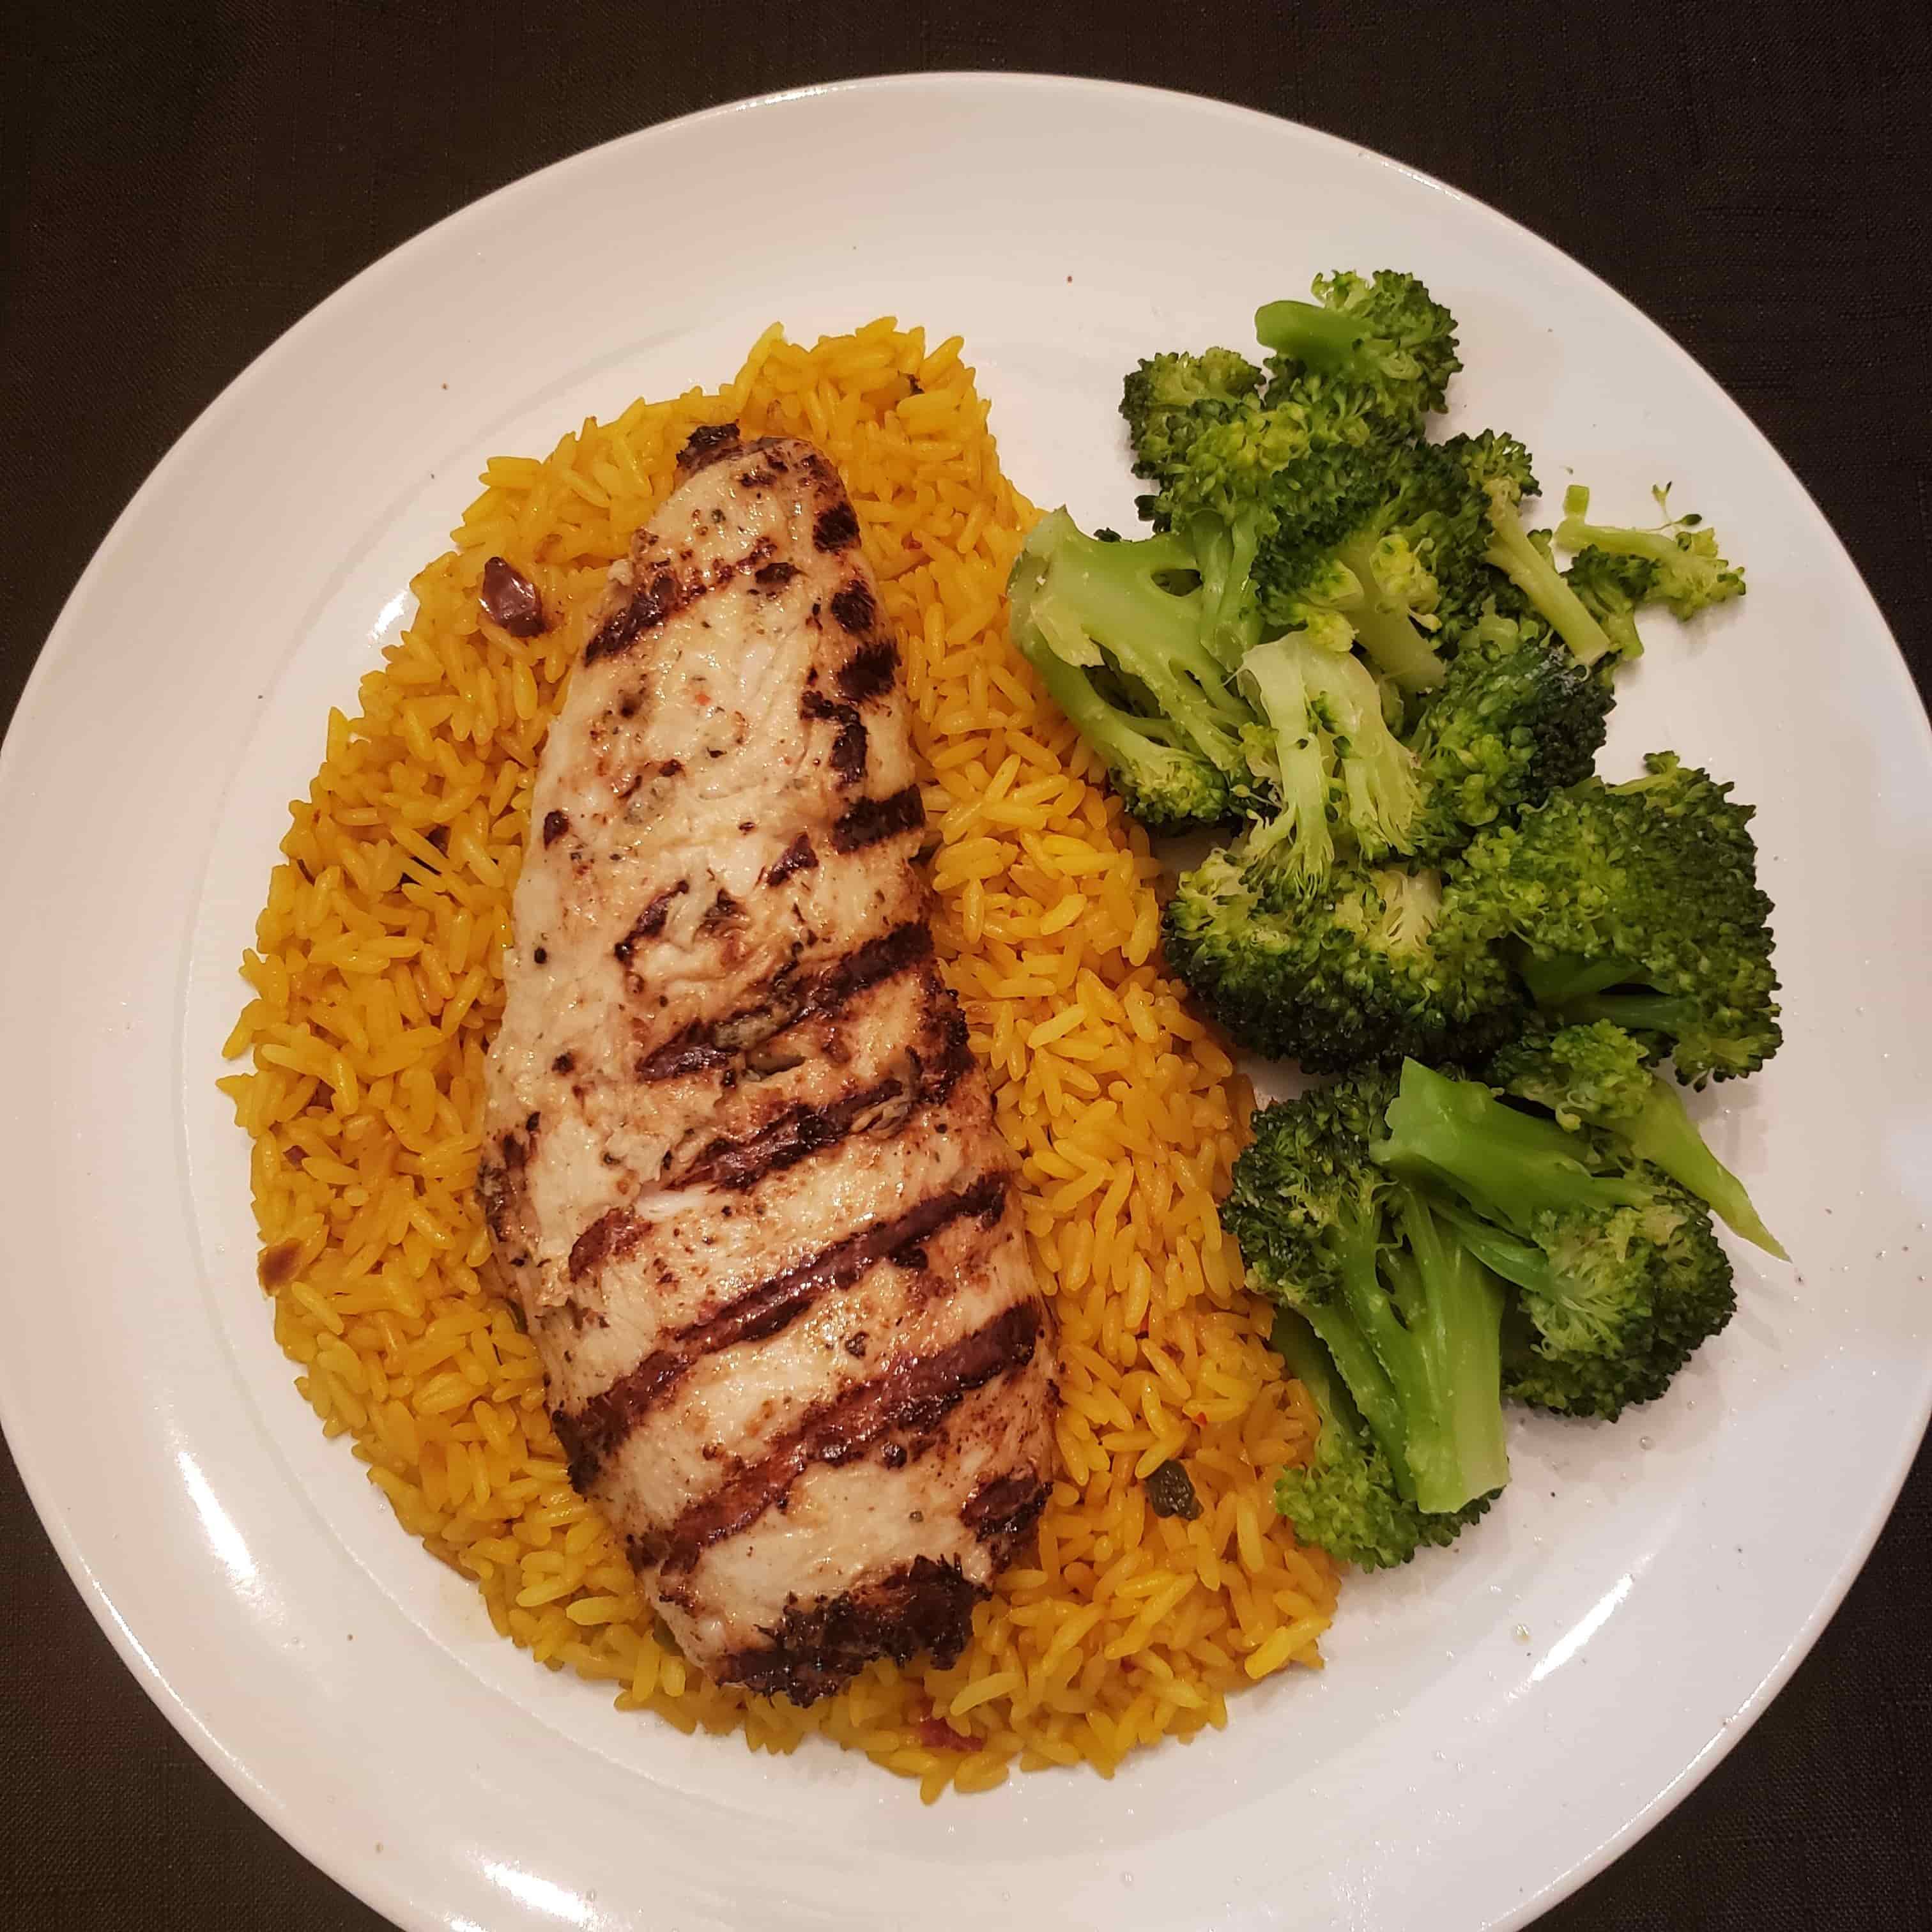 Picture of salmon over rice with broccoli